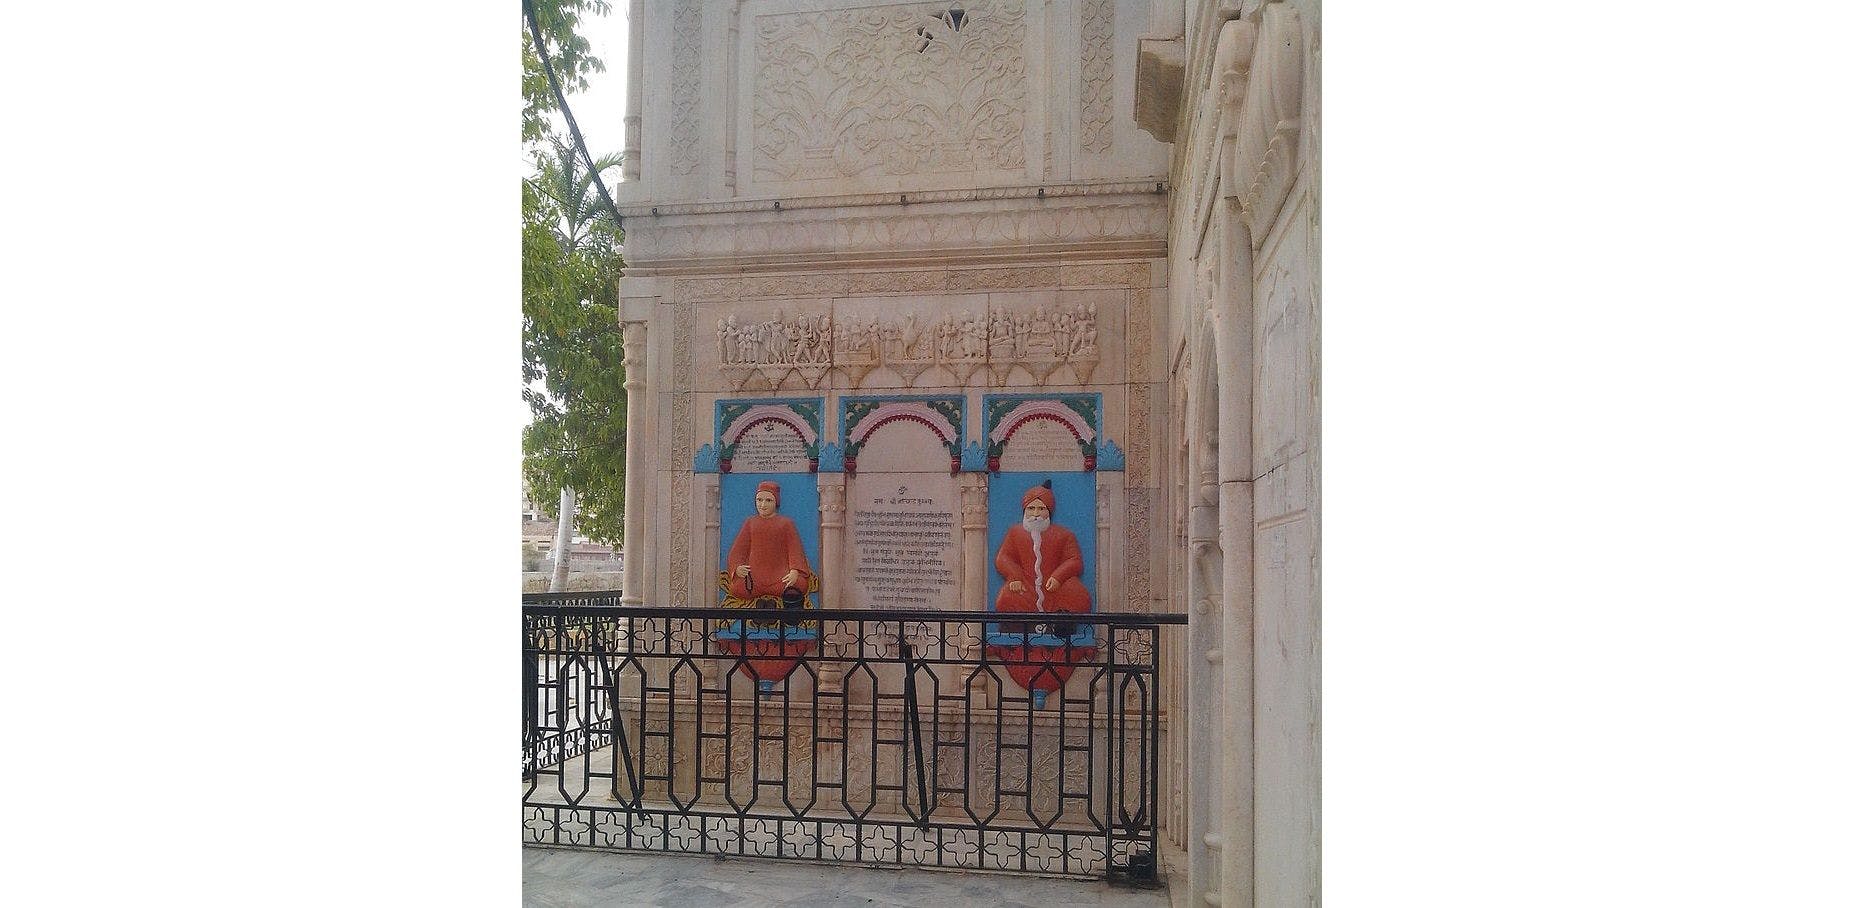 Memorial with an invocation to Sri Chand